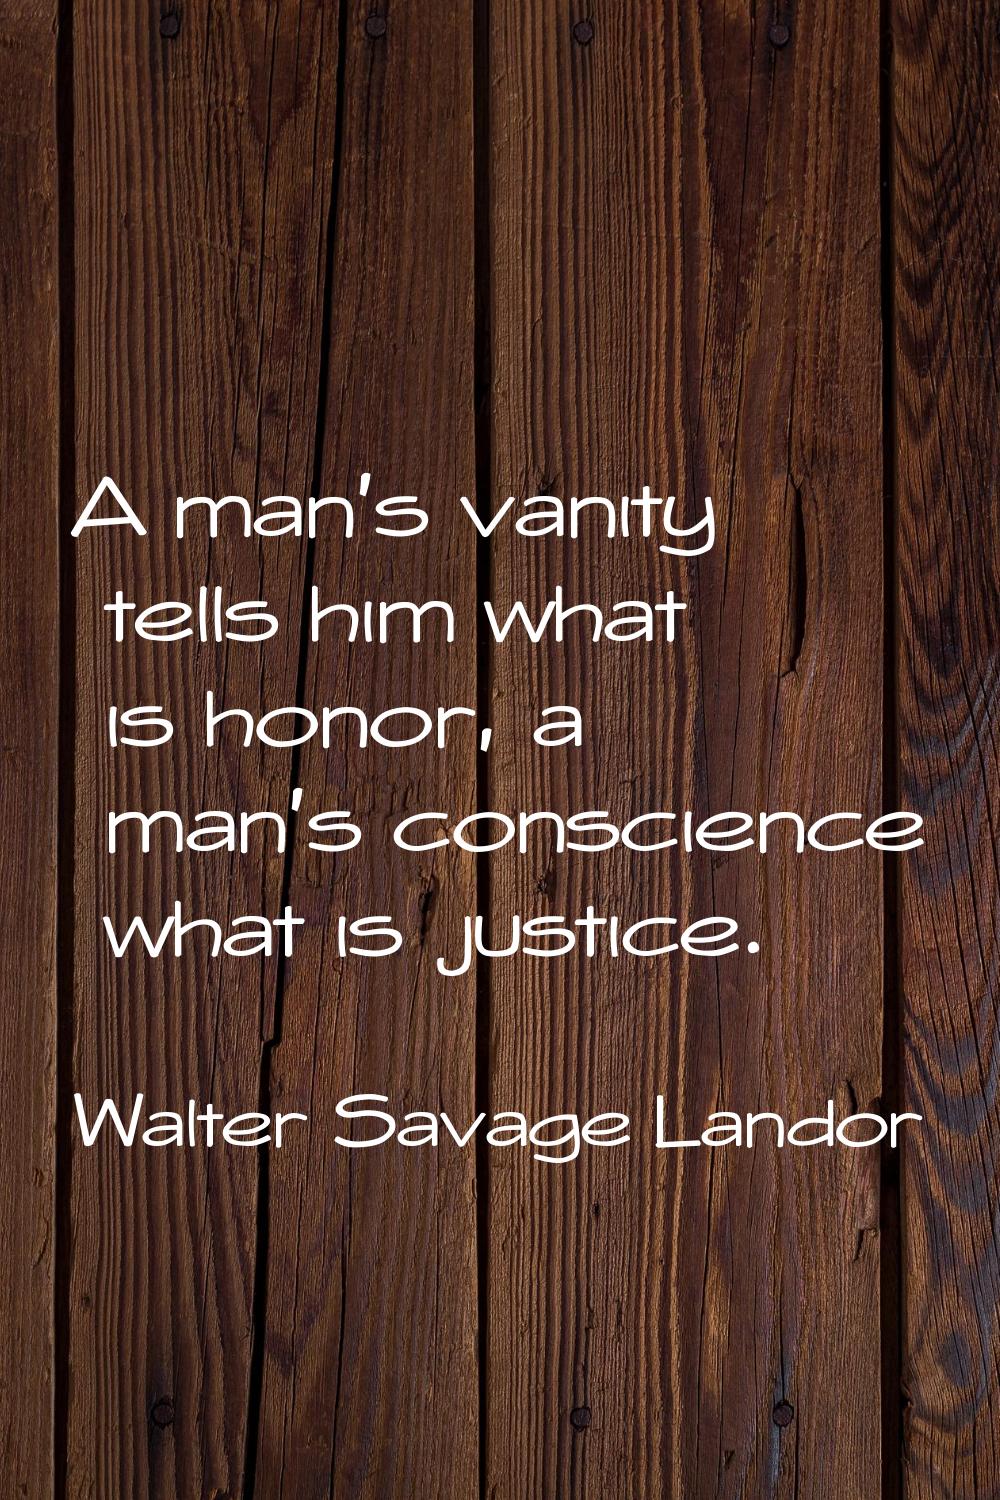 A man's vanity tells him what is honor, a man's conscience what is justice.